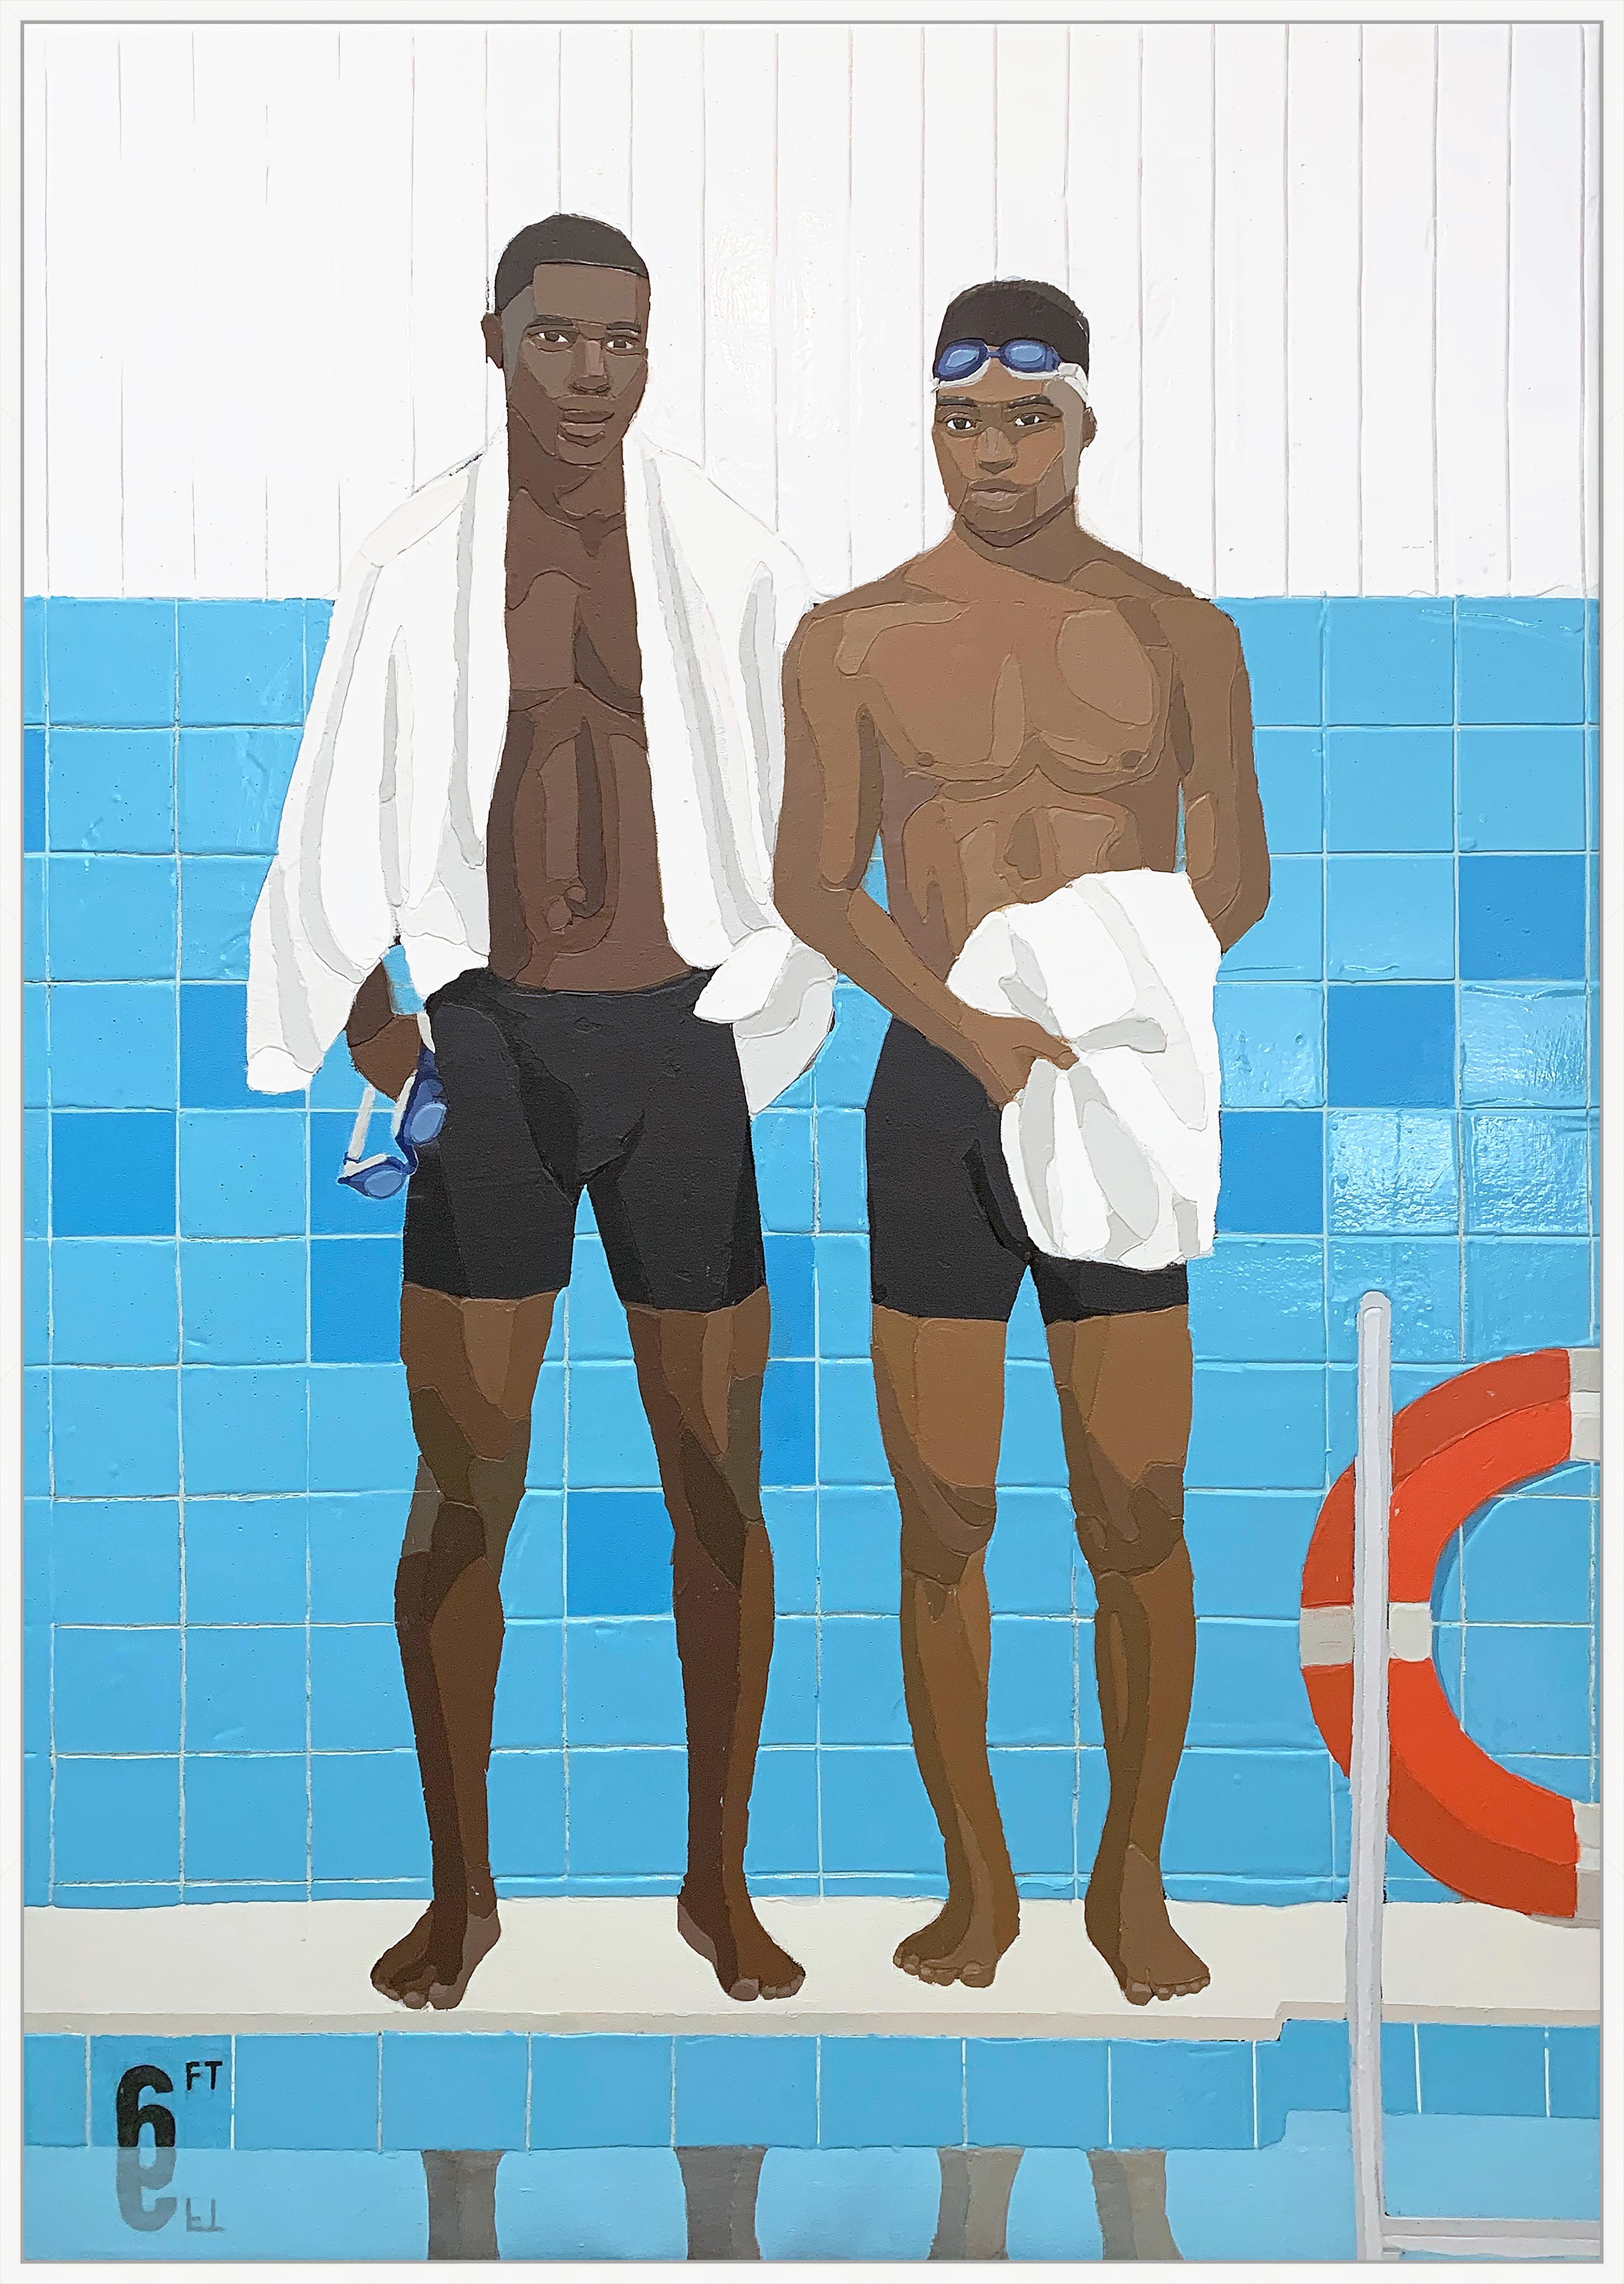 Andrew Gray Portrait Painting - "Condition Week" - Original Acrylic Painting Featuring two Male Swimmers